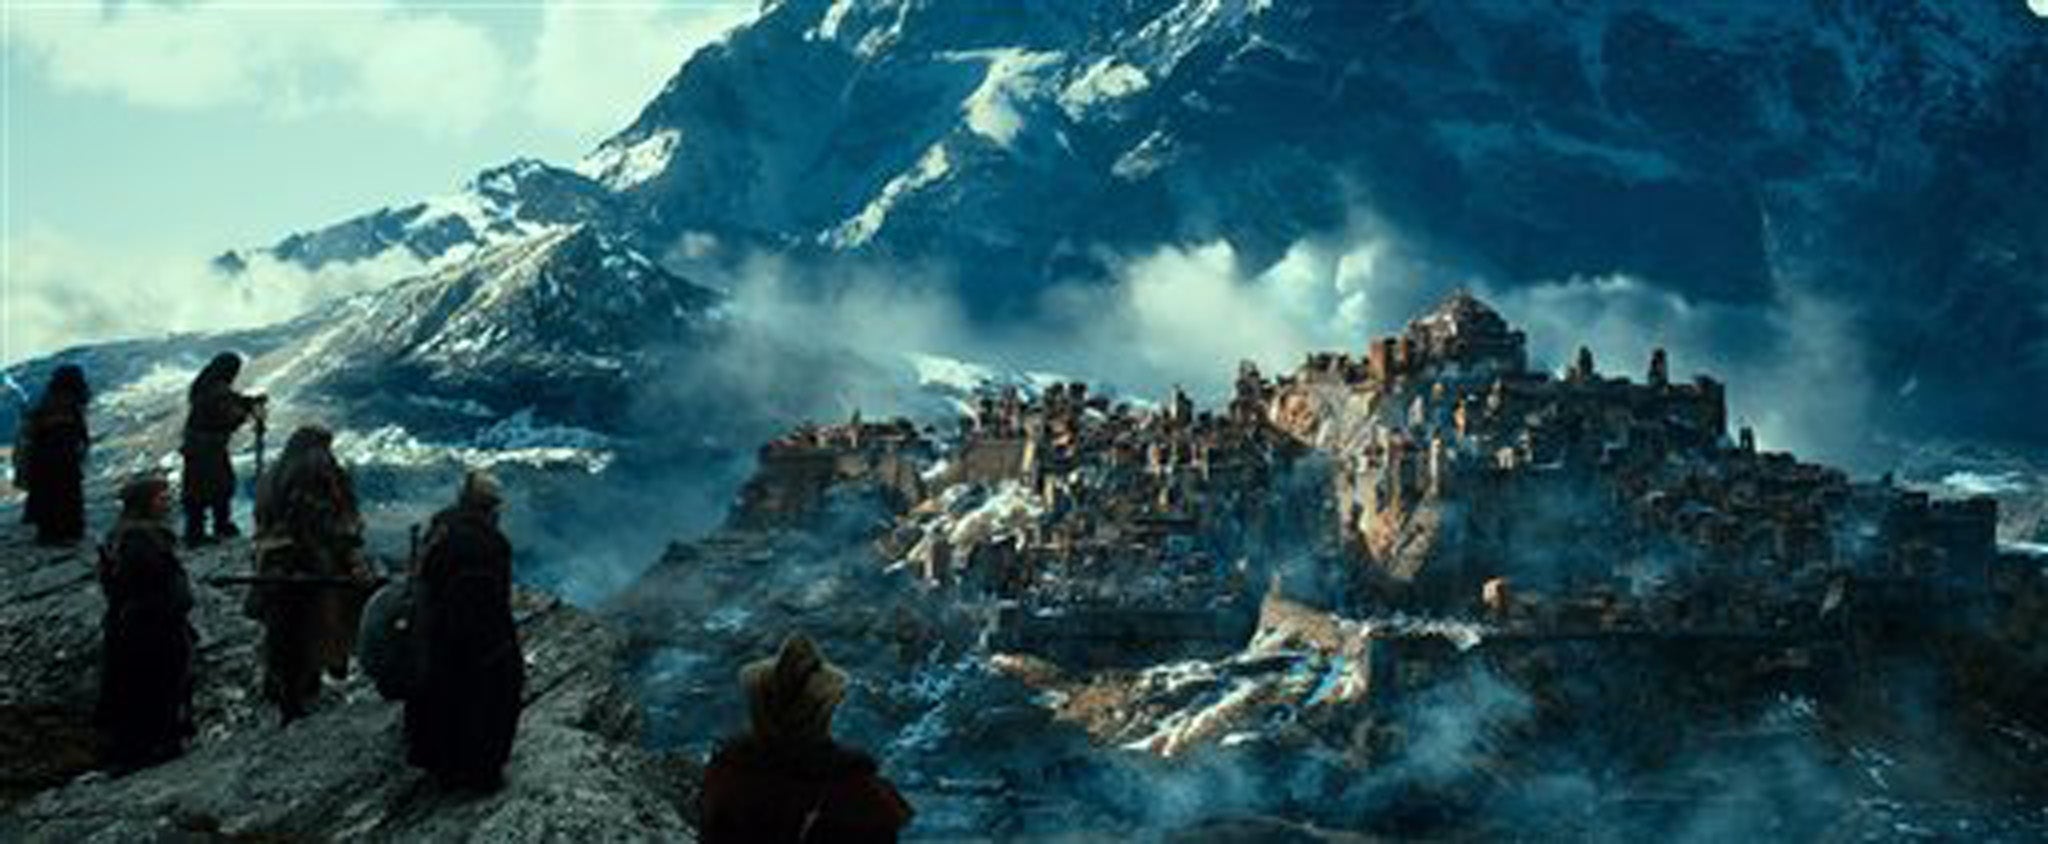 A scene from Peter Jackson's The Hobbit: The Desolation of Smaug